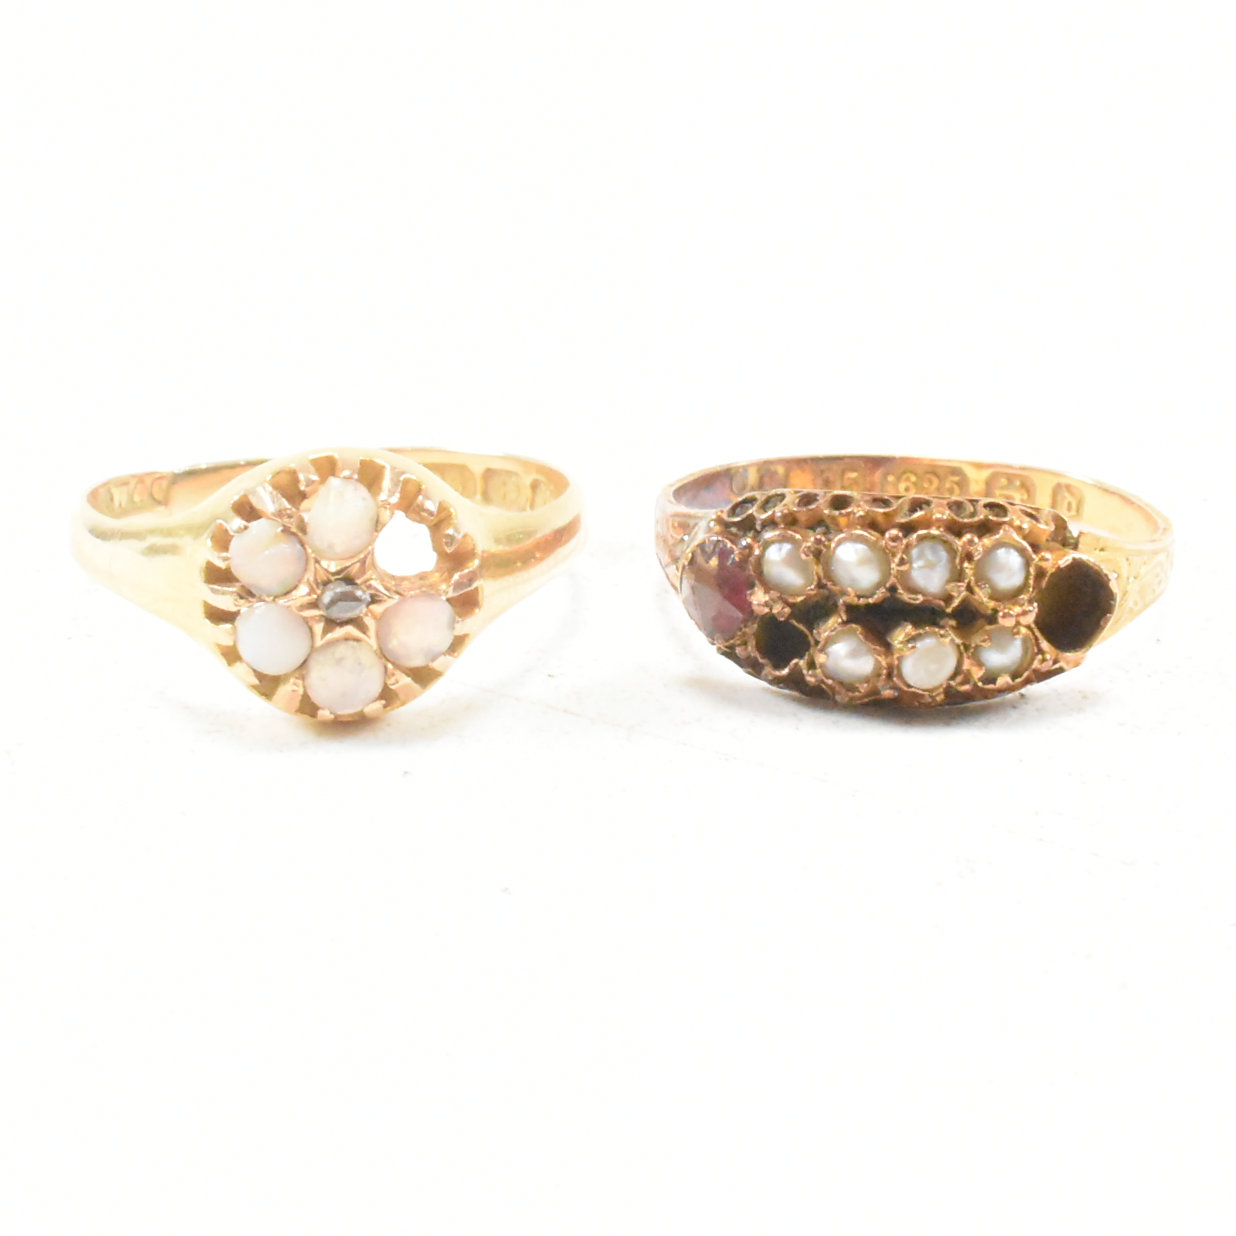 TWO HALLMARKED 15CT GOLD VICTORIAN GEM SET RINGS - Image 2 of 8